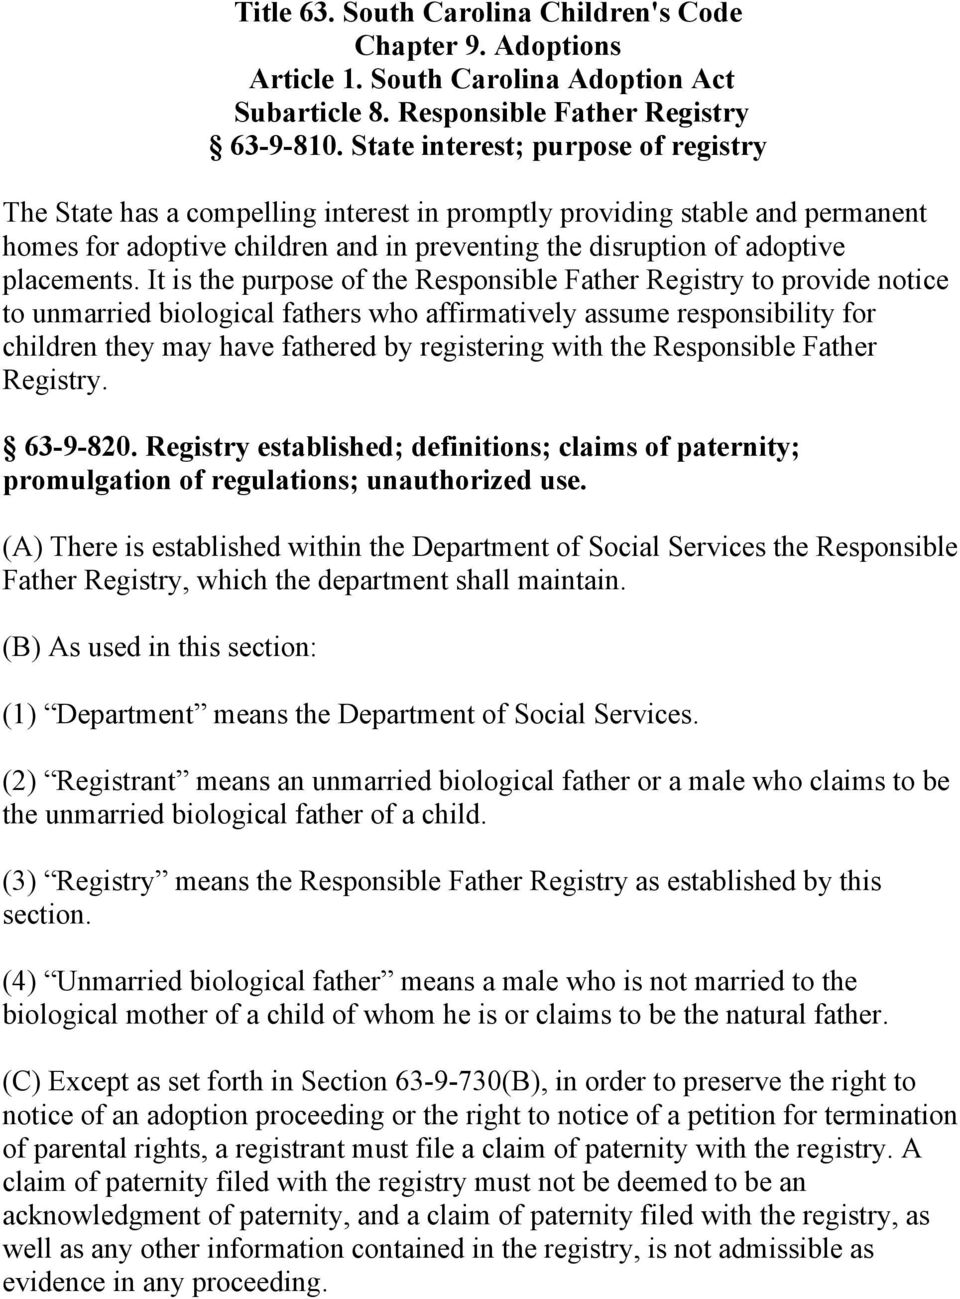 It is the purpose of the Responsible Father Registry to provide notice to unmarried biological fathers who affirmatively assume responsibility for children they may have fathered by registering with